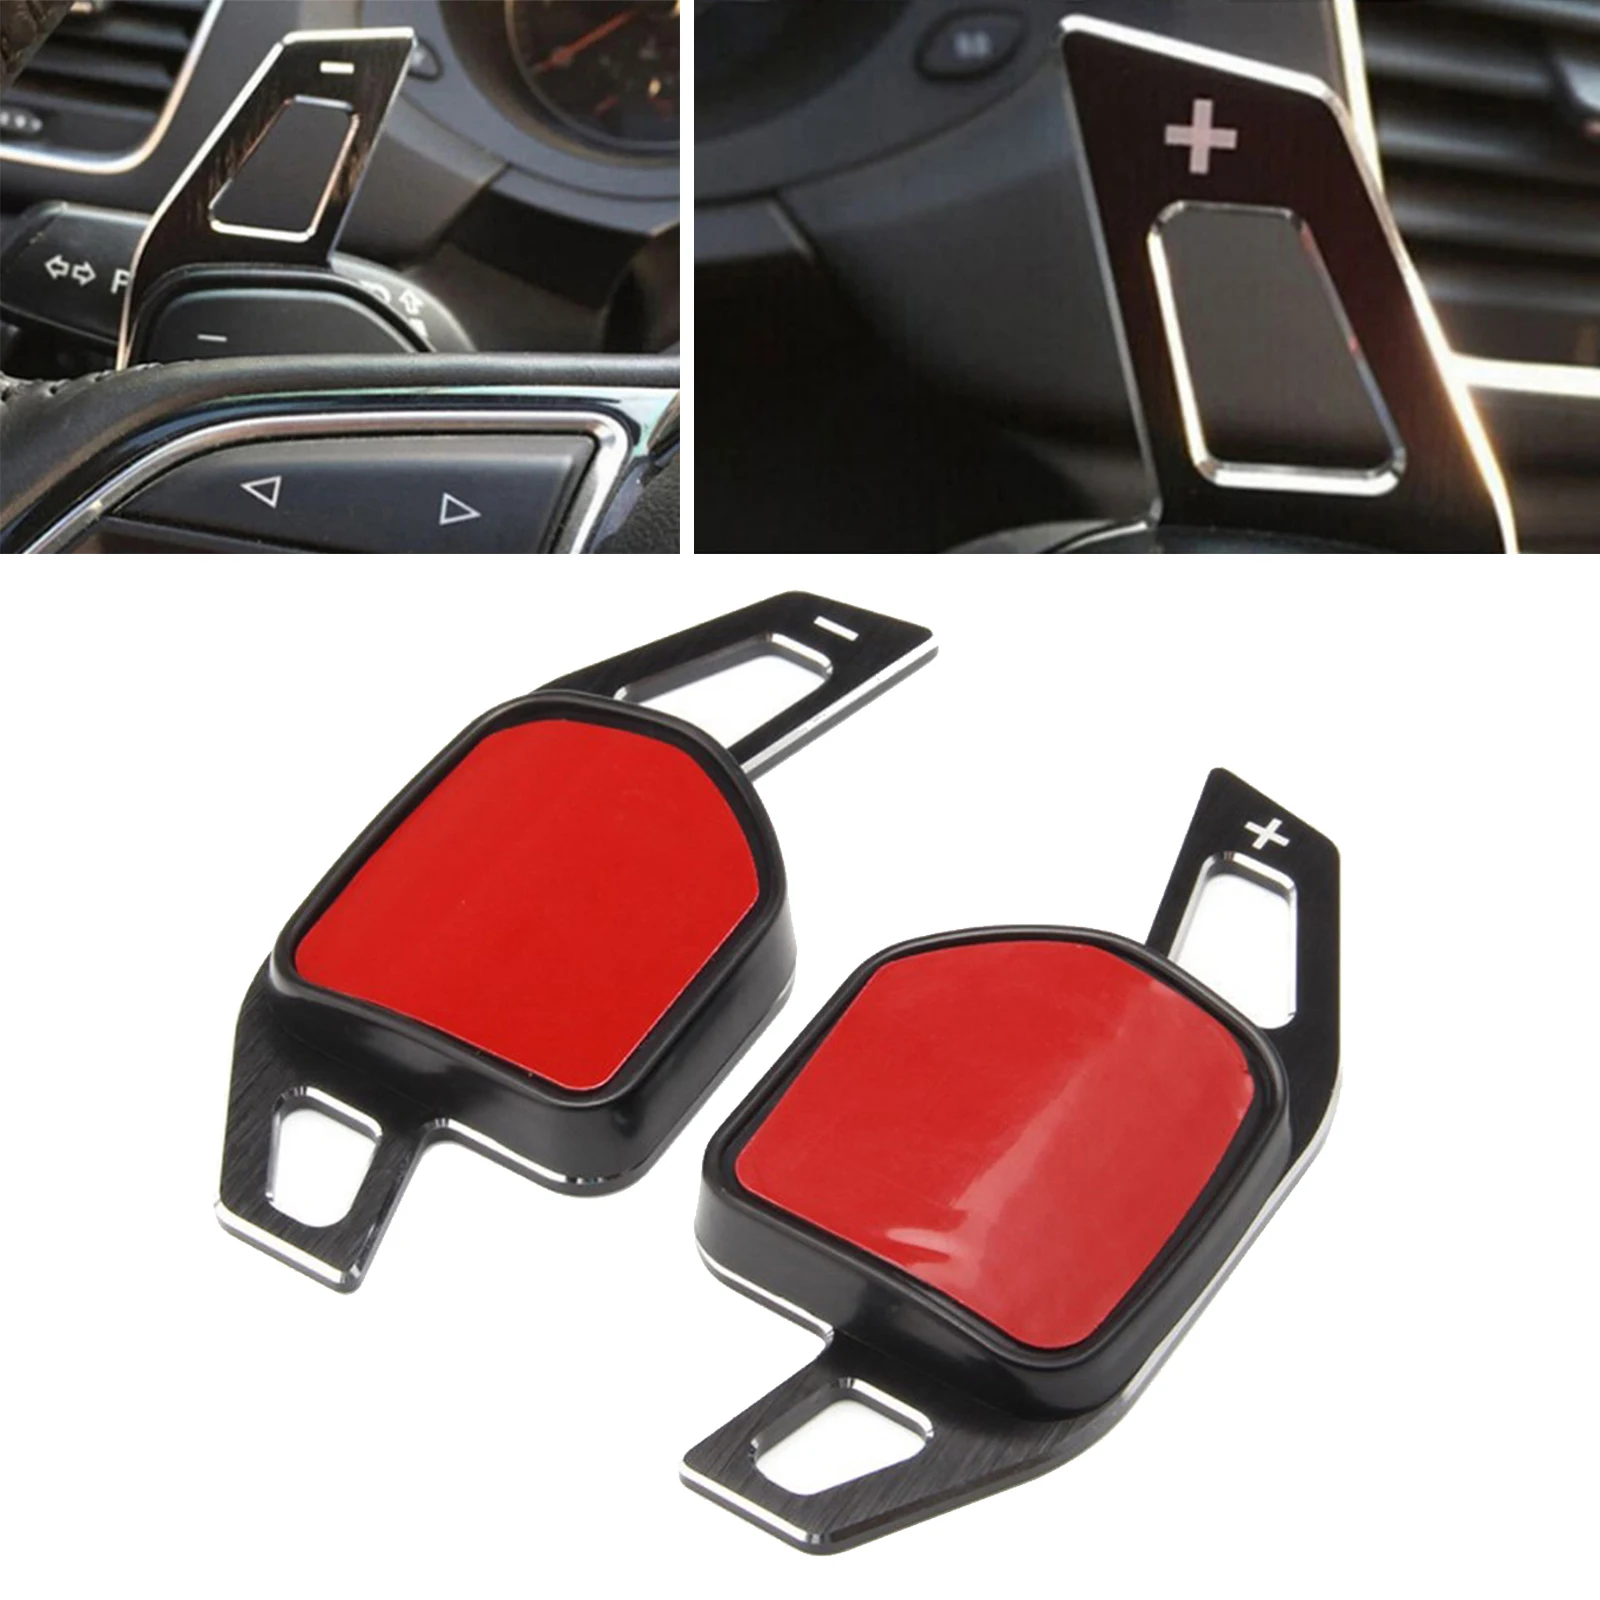 

Pair Steering Wheel er Paddle Extension for Audi A1(2010 - 2011), A3 / S3 / RS3(2006 - 2011), A4 / S4(2006 - 2011)